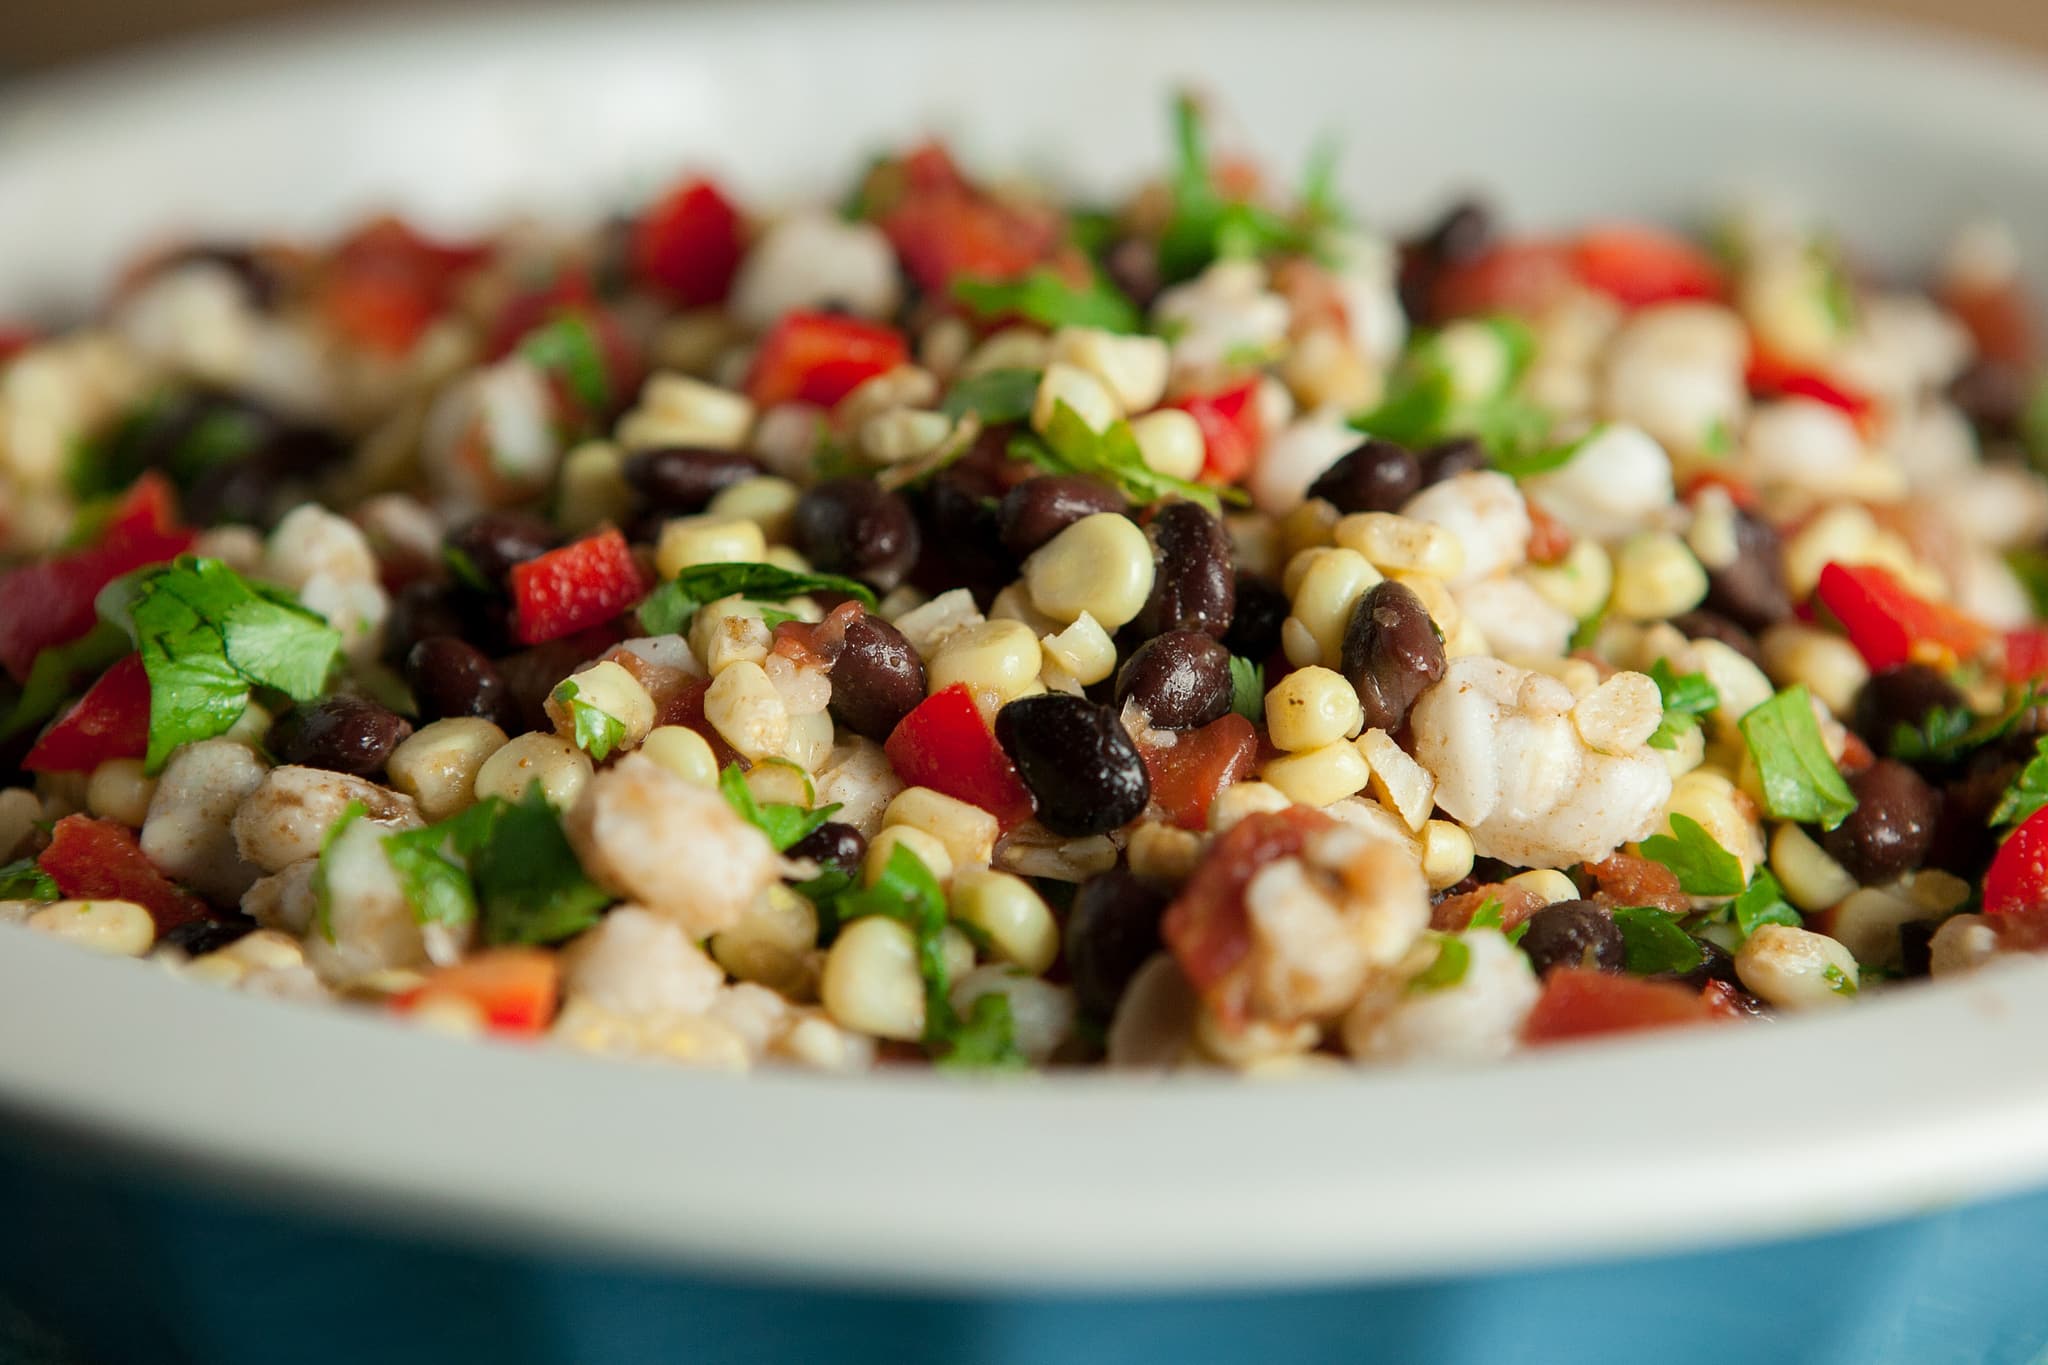 Fresh Mexican Corn Salad - it's a quick and delicious recipe using fresh ingredients!